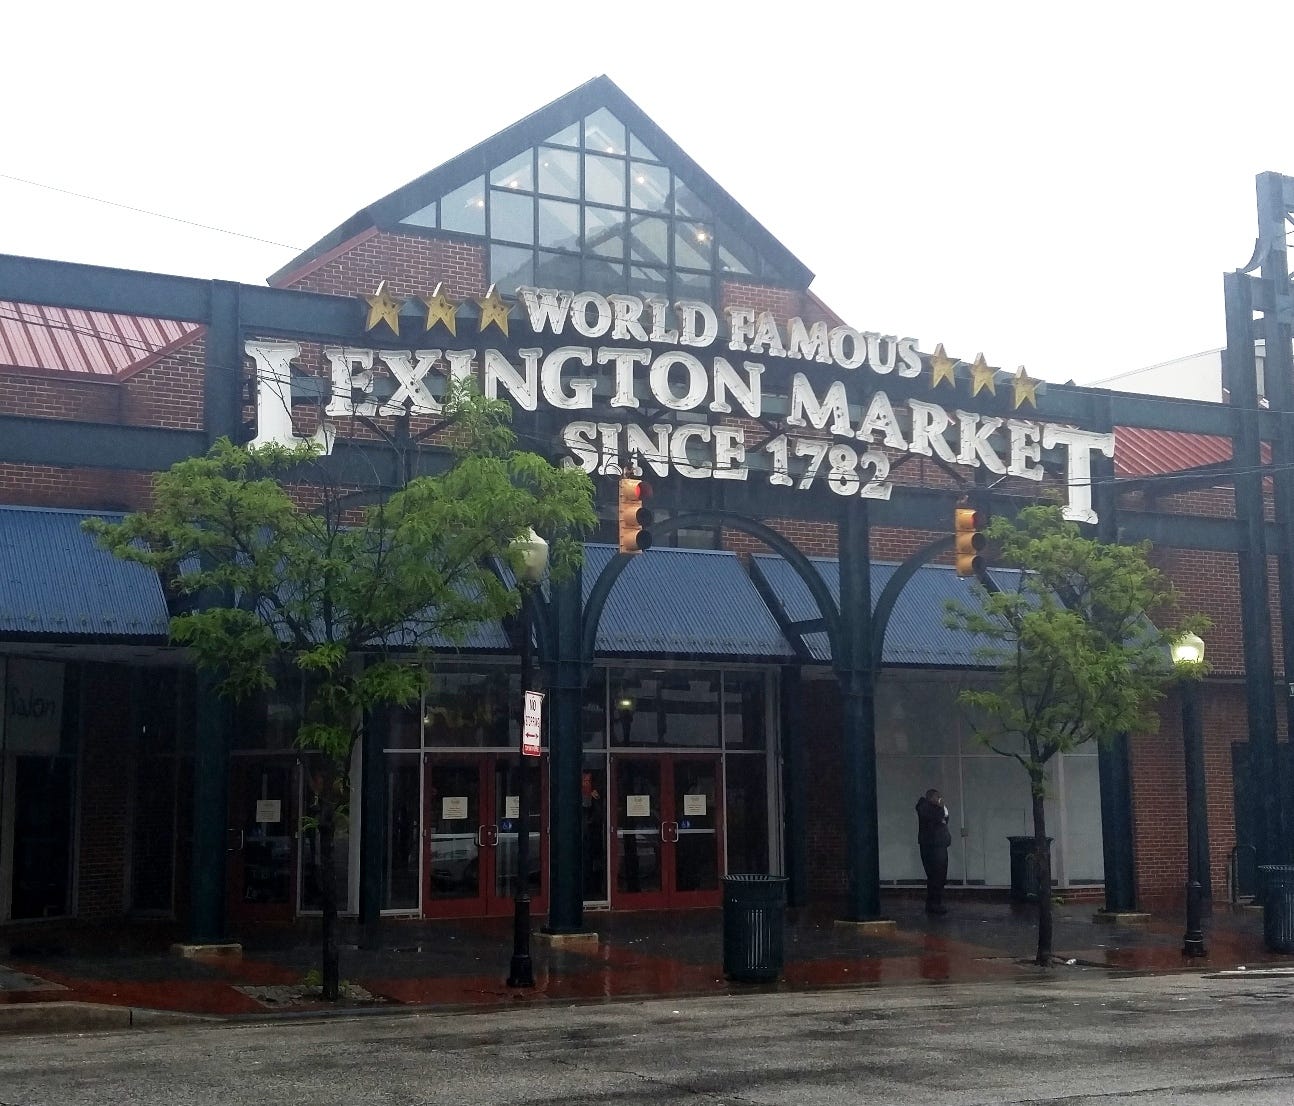 Baltimore's Lexington Market opened in 1782 and is the longest continually open public market in the USA.